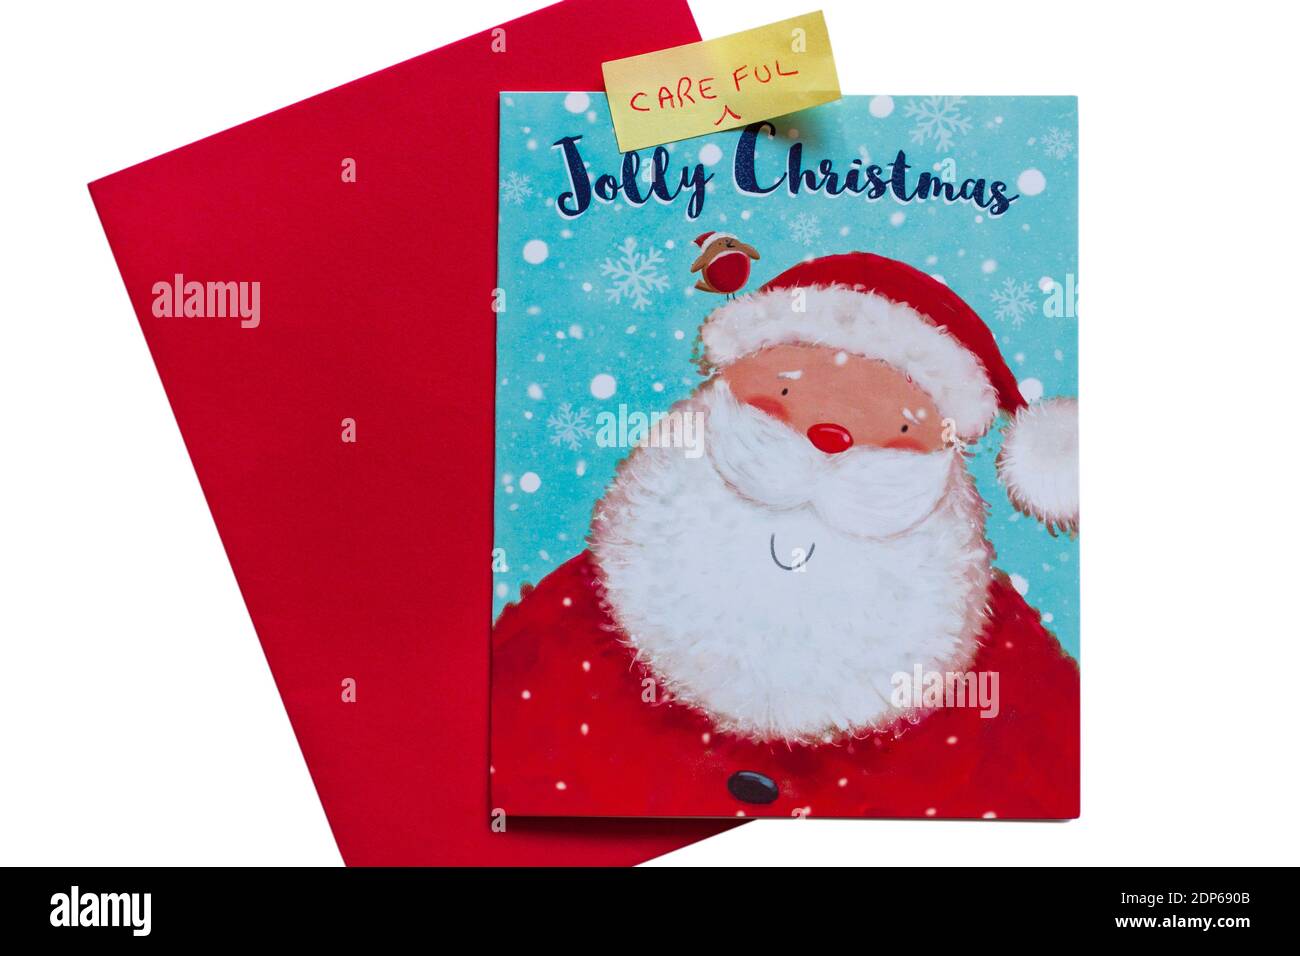 Have a Jolly Careful Christmas - Jolly Christmas card with red envelope with word Careful added due to Coronavirus Covid 19 pandemic and restrictions Stock Photo